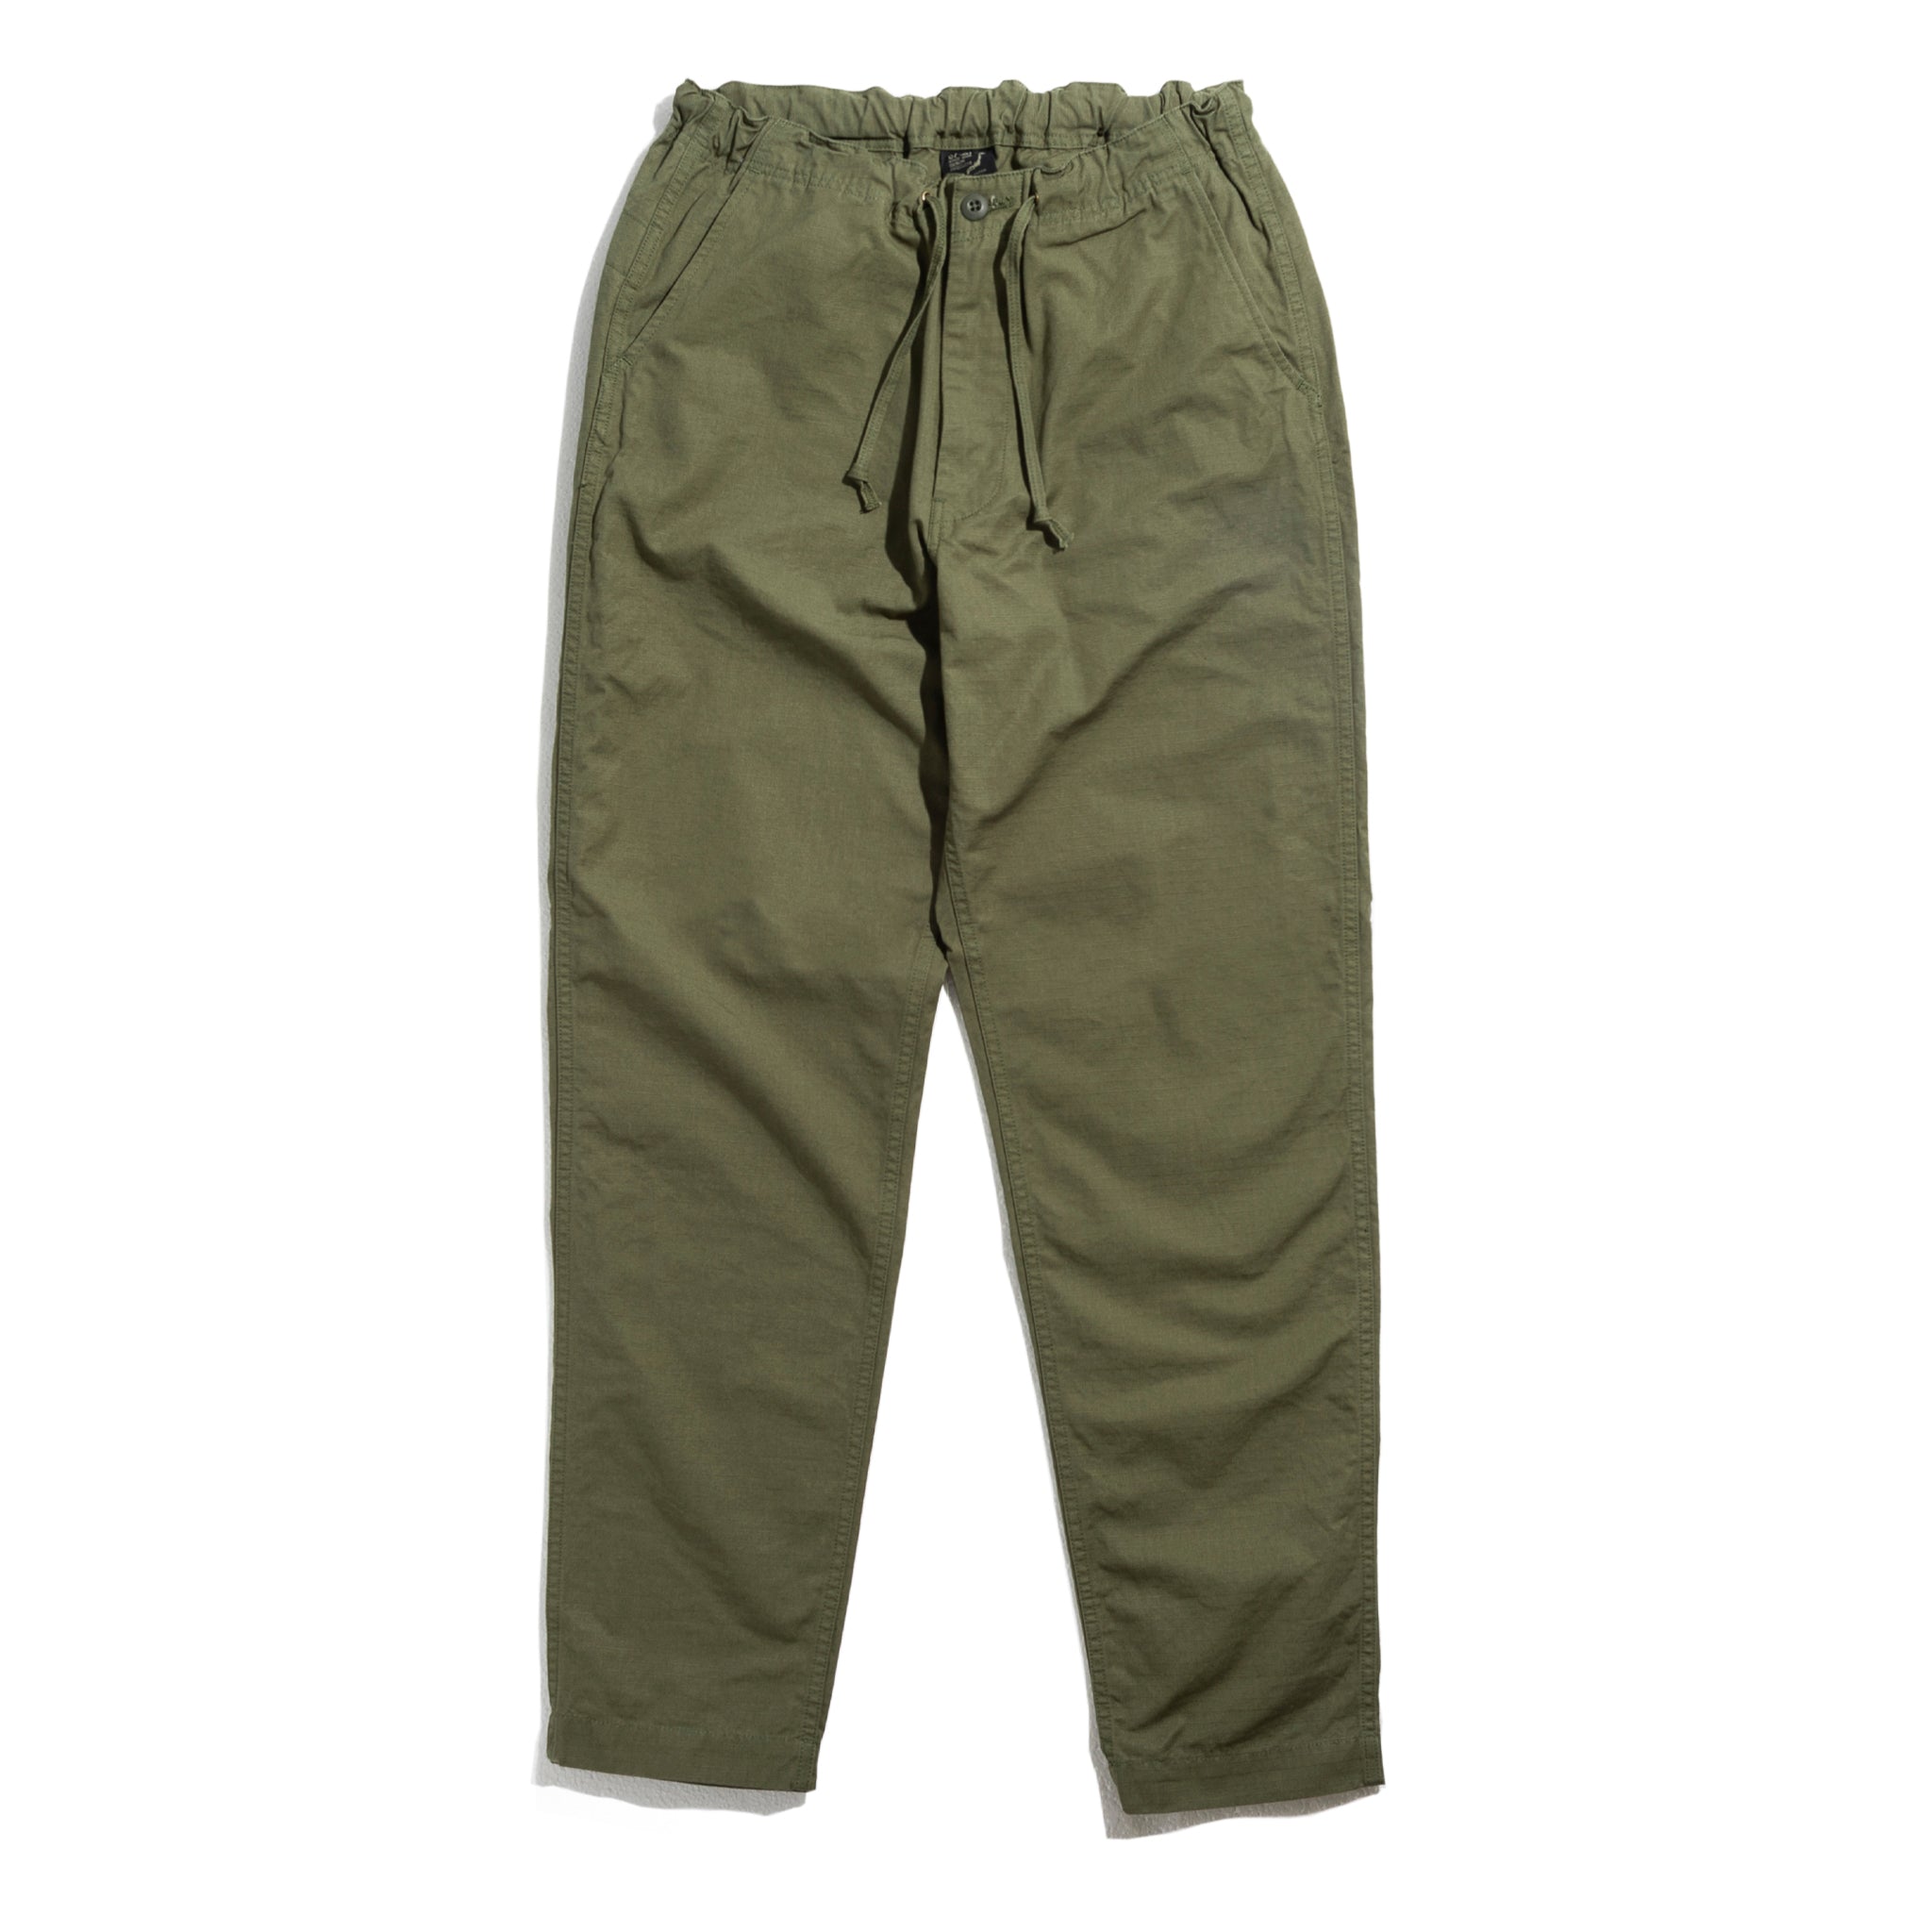 OrSlow New Yorker Pant: Army Green - The Union Project